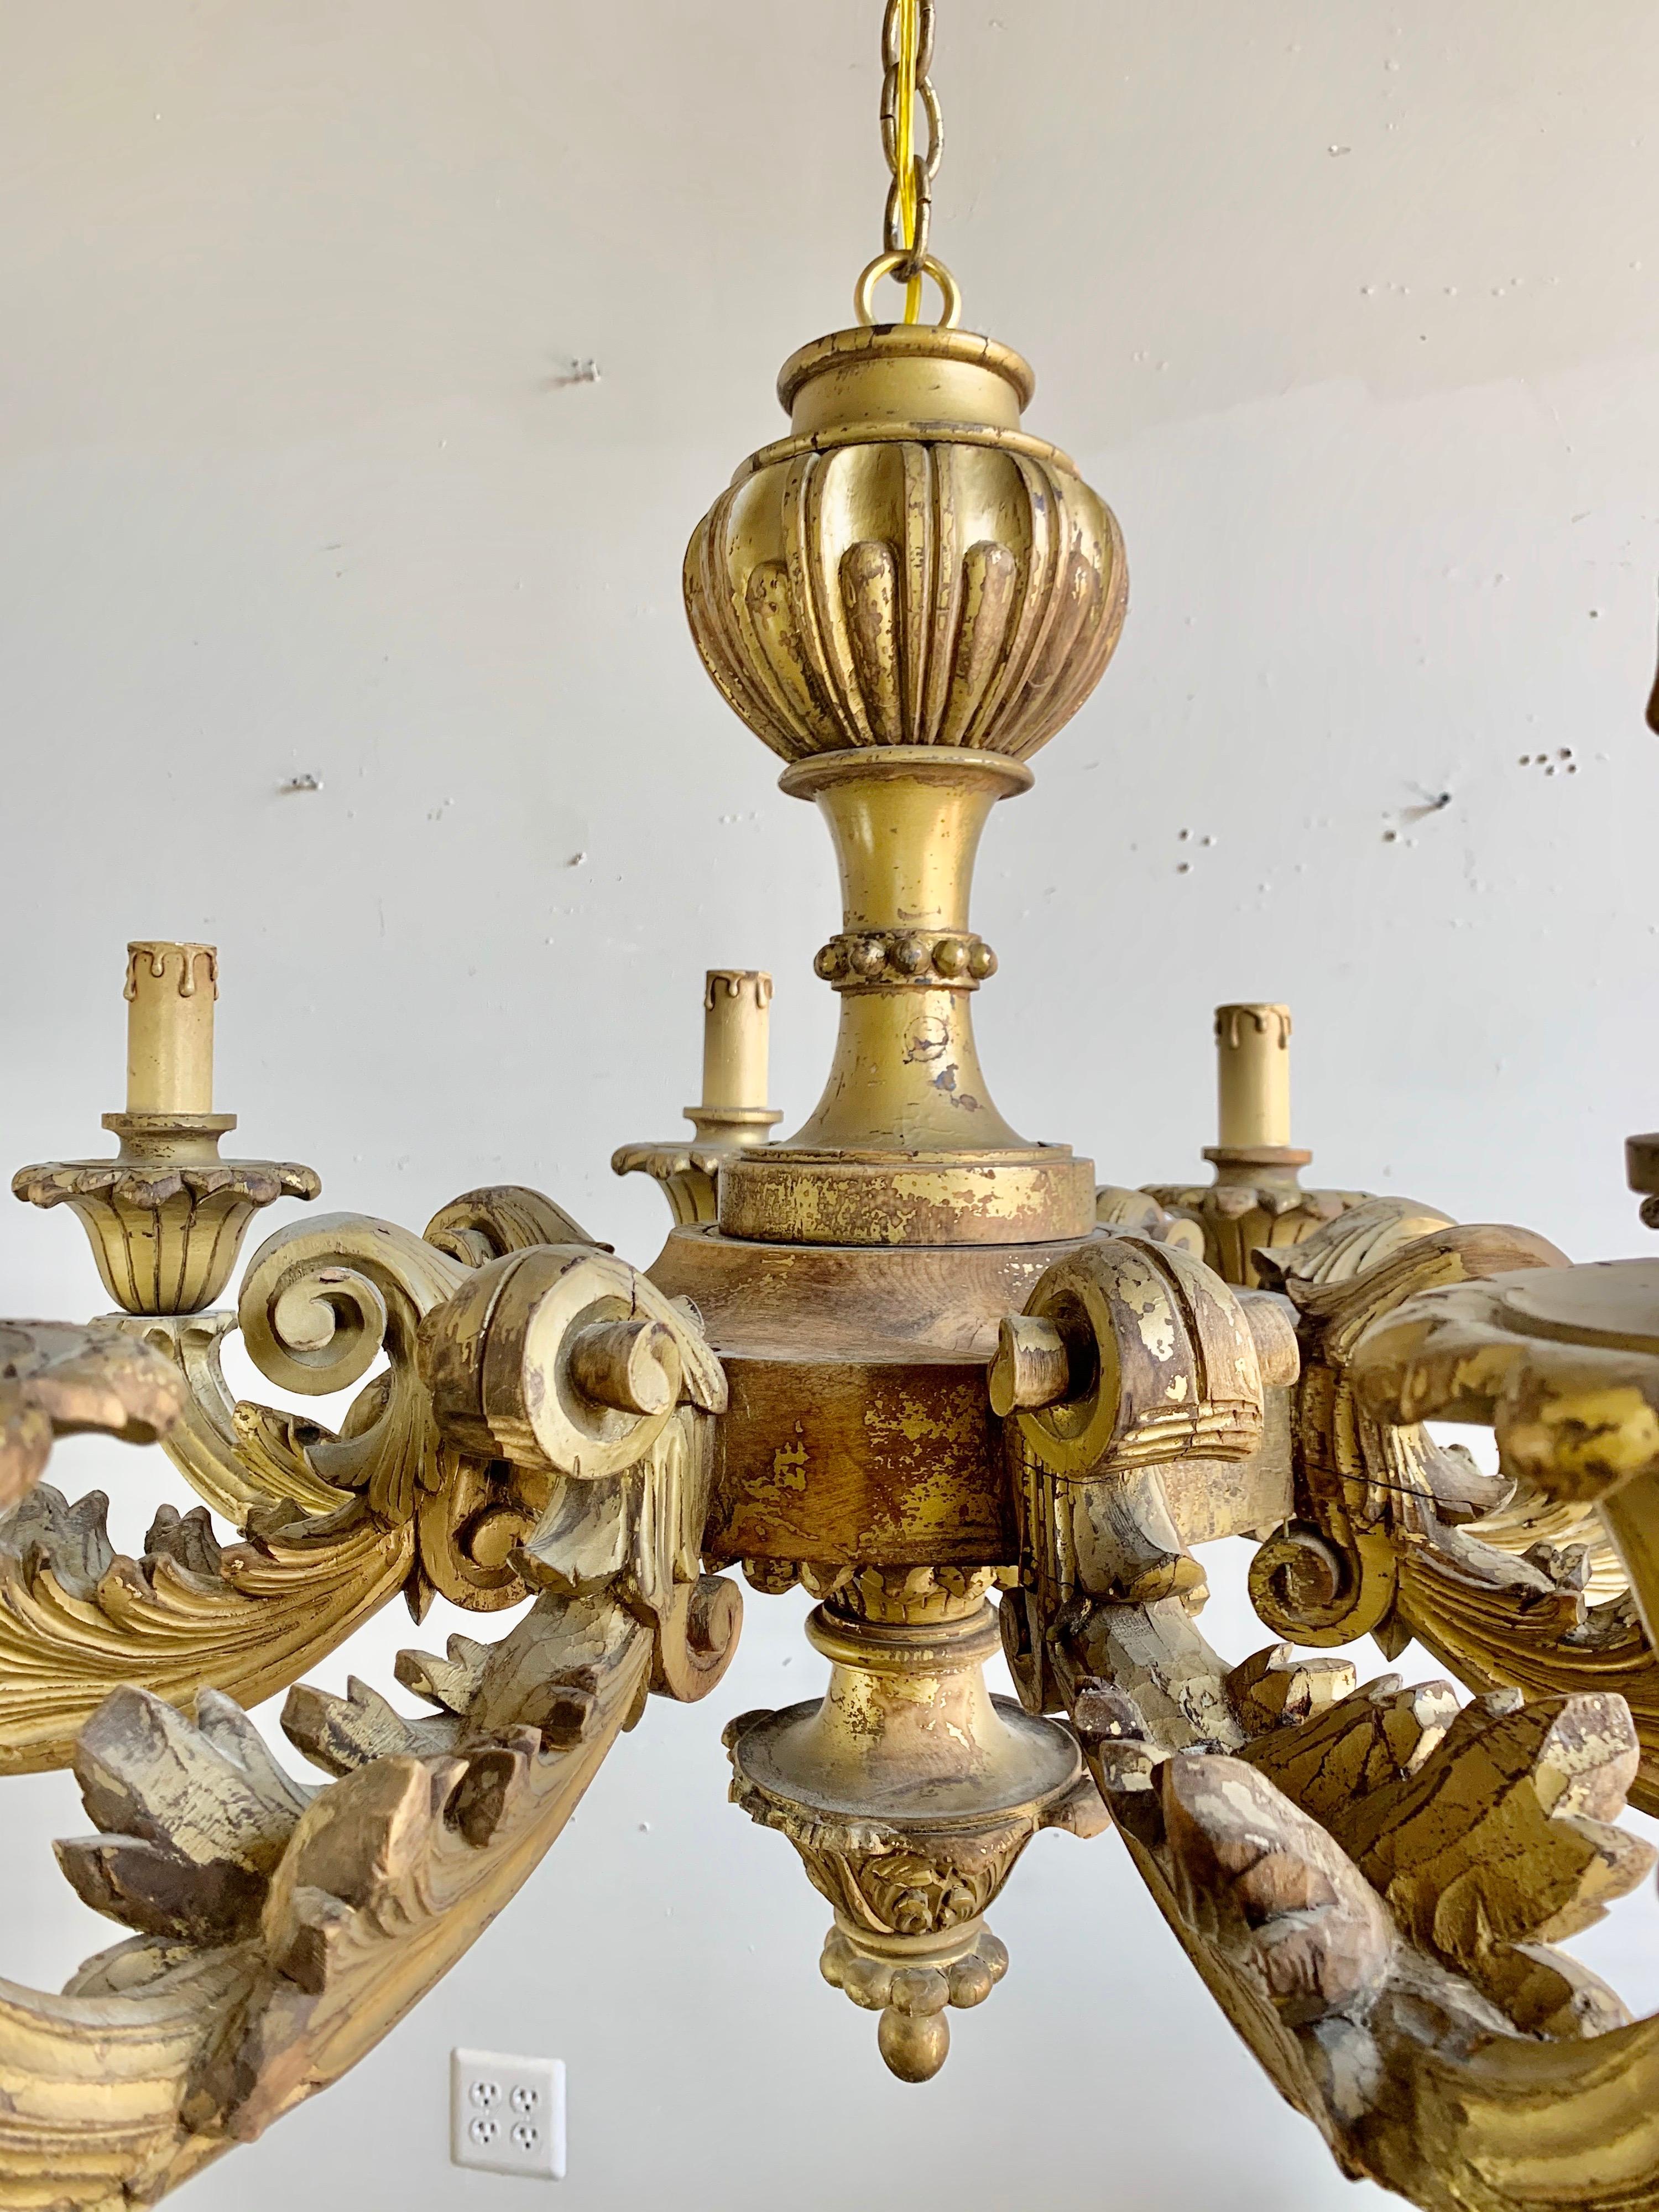 Italian 8-light 22-karat gold leaf carved wood chandelier wired and includes chain and canopy. Ready to install.